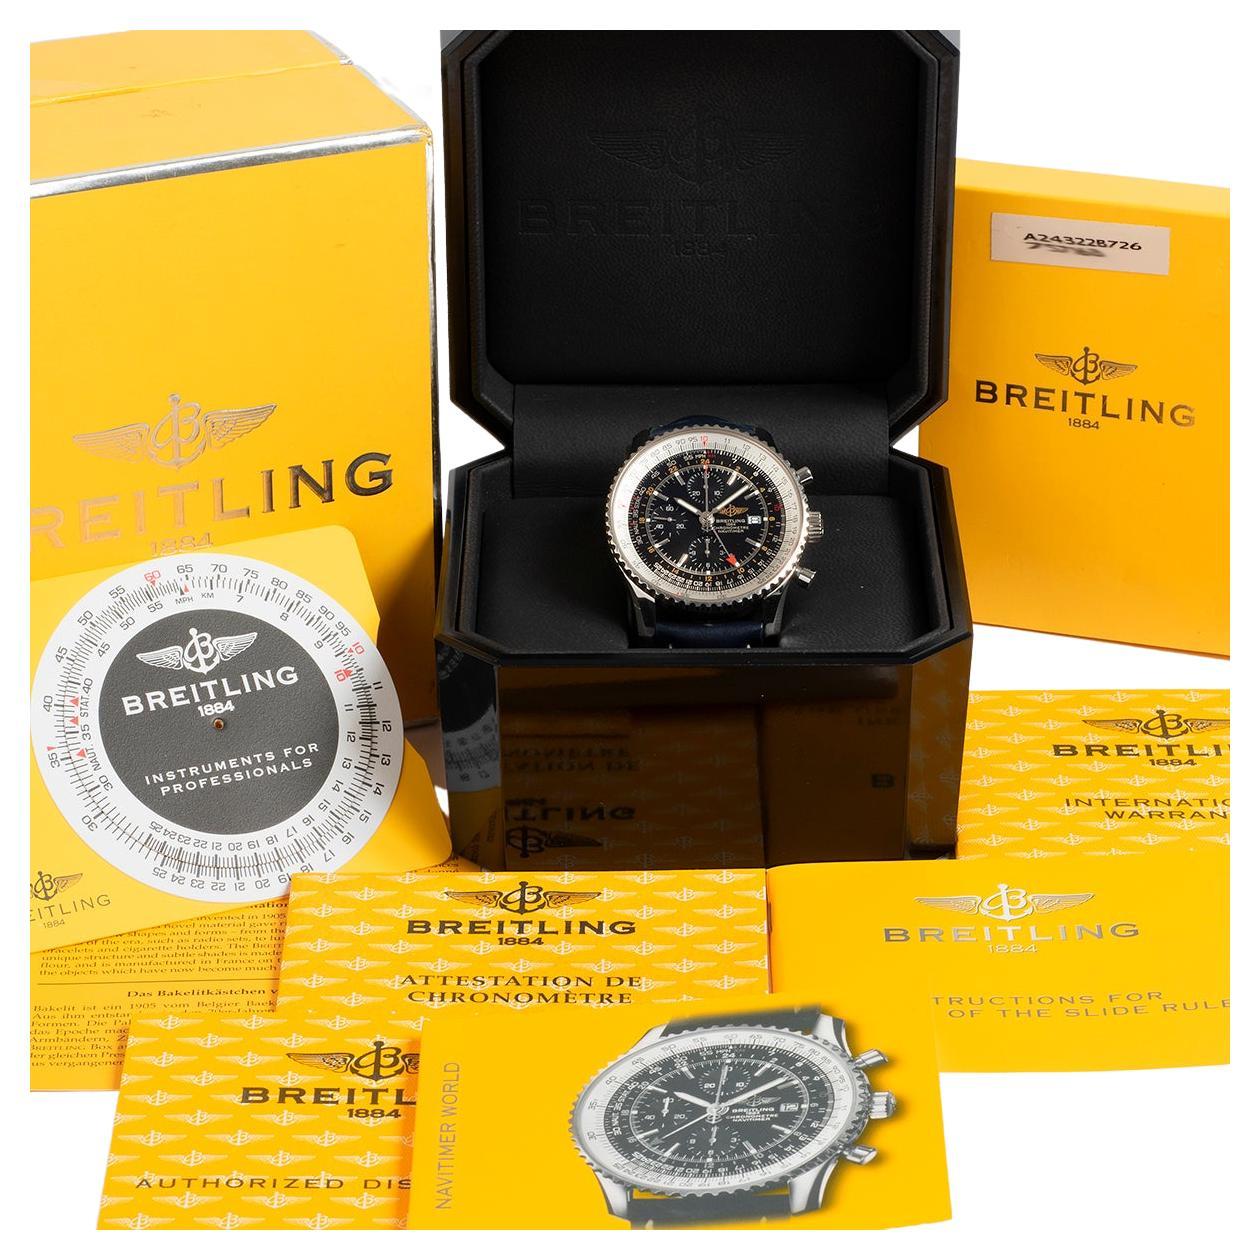 Breitling Navitimer GMT / World Wristwatch Ref A24422. Complete Set. For  Sale at 1stDibs | breitling navitimer e17370, breitling e17370 chronometre  navitimer